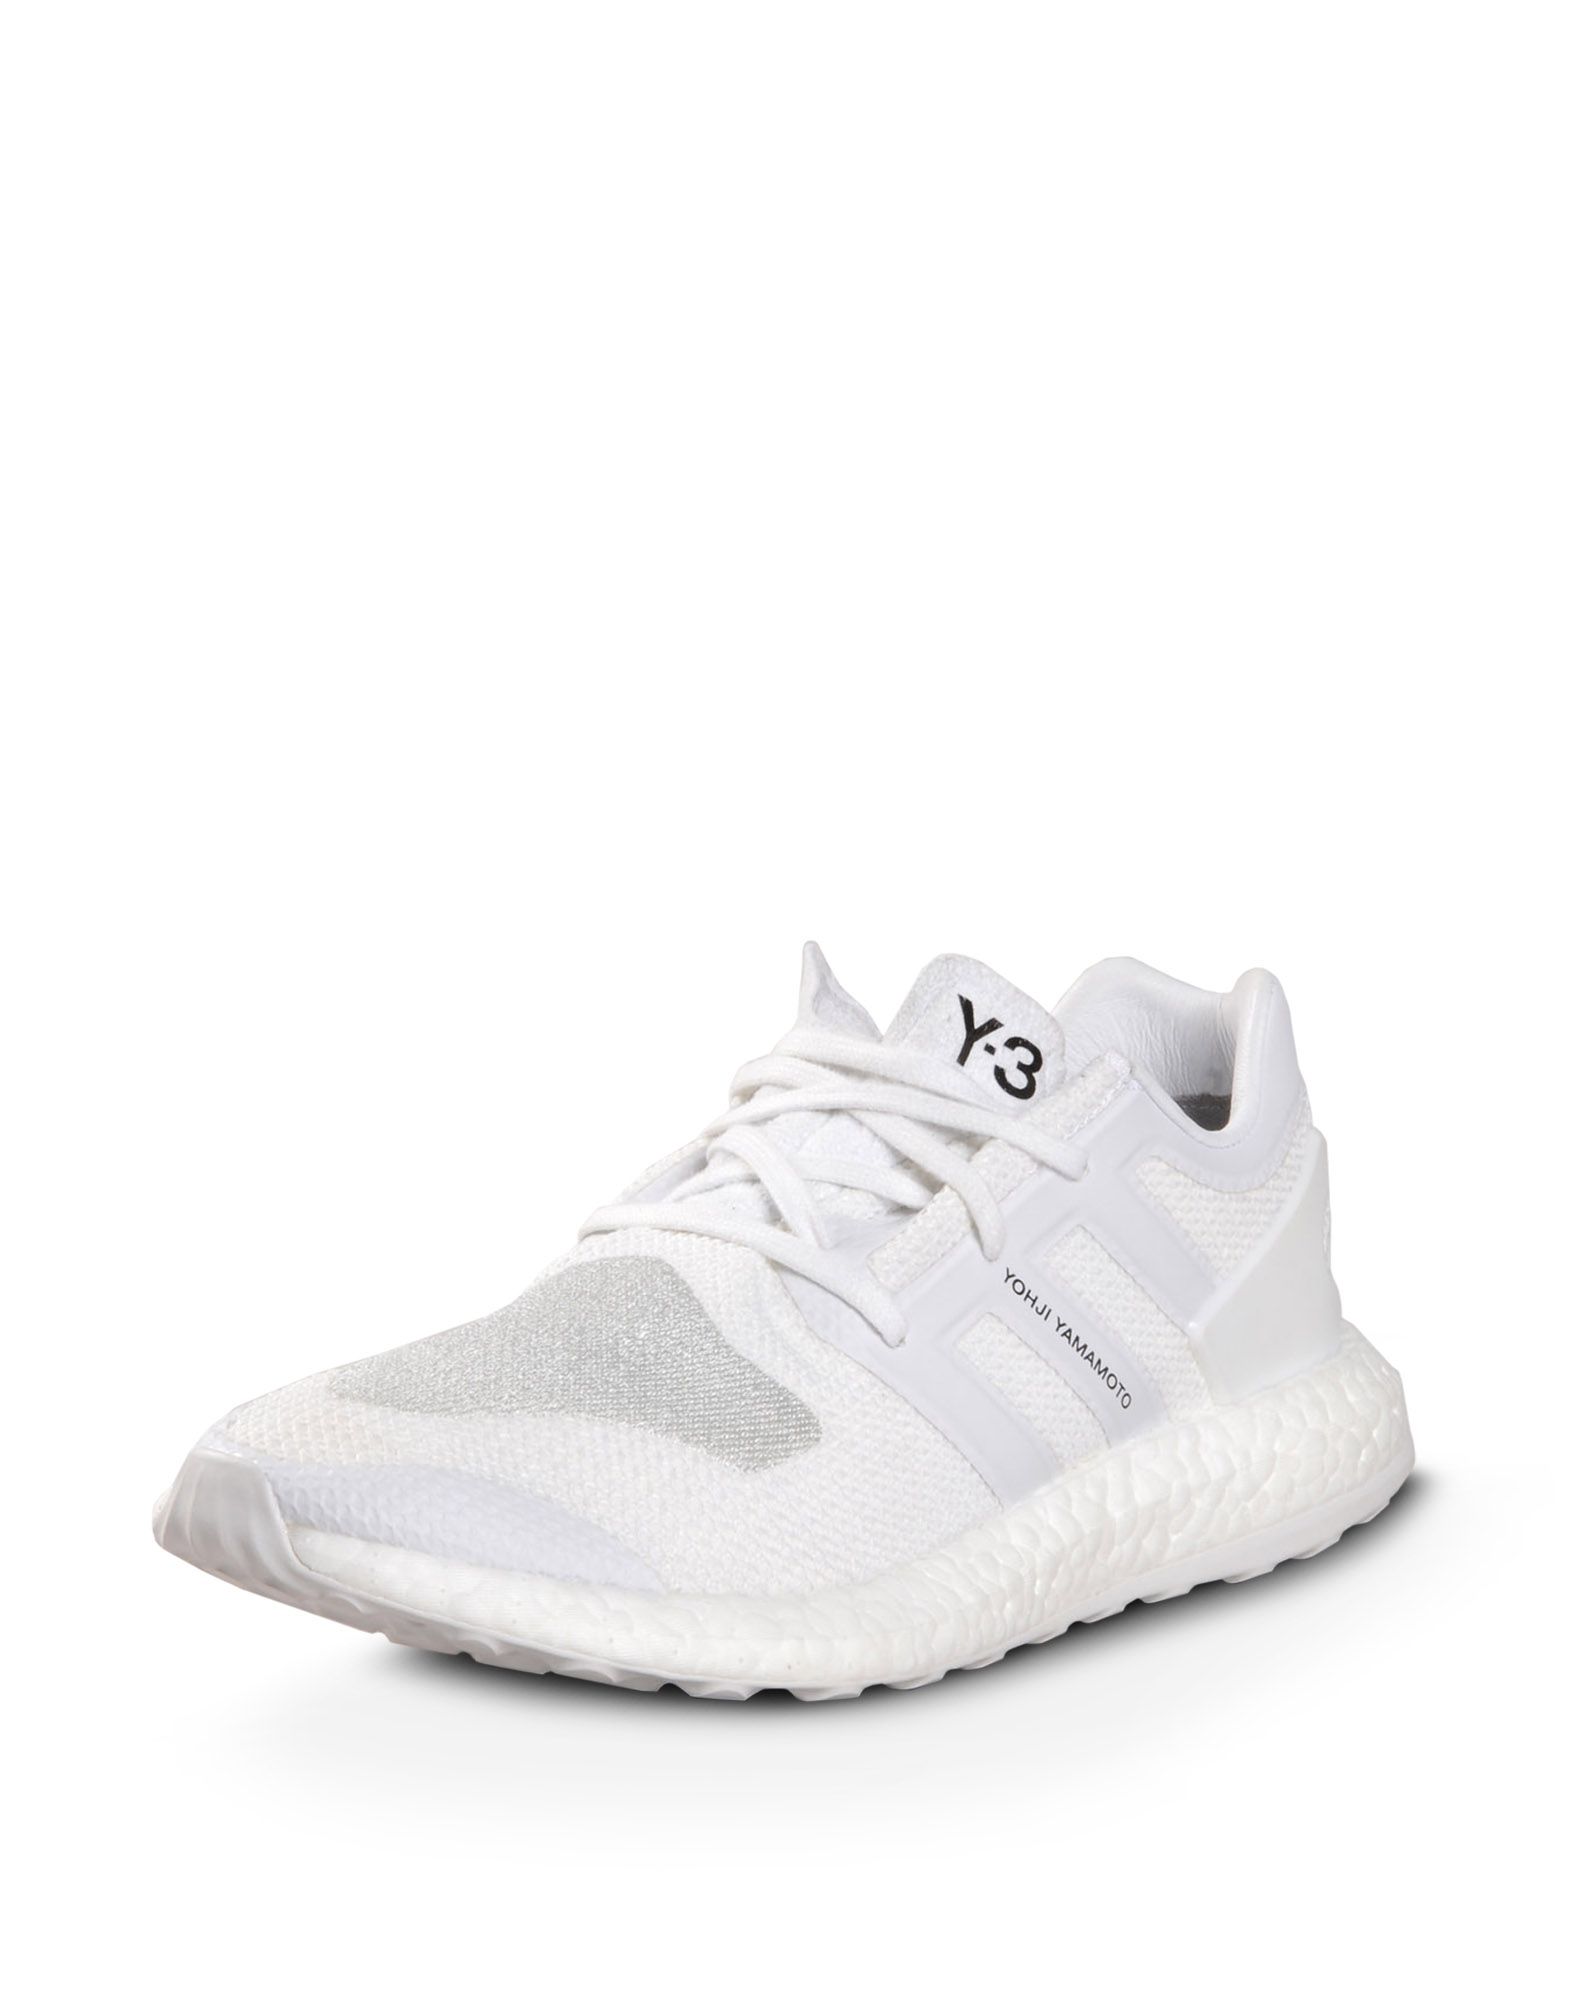 y3 shoes white